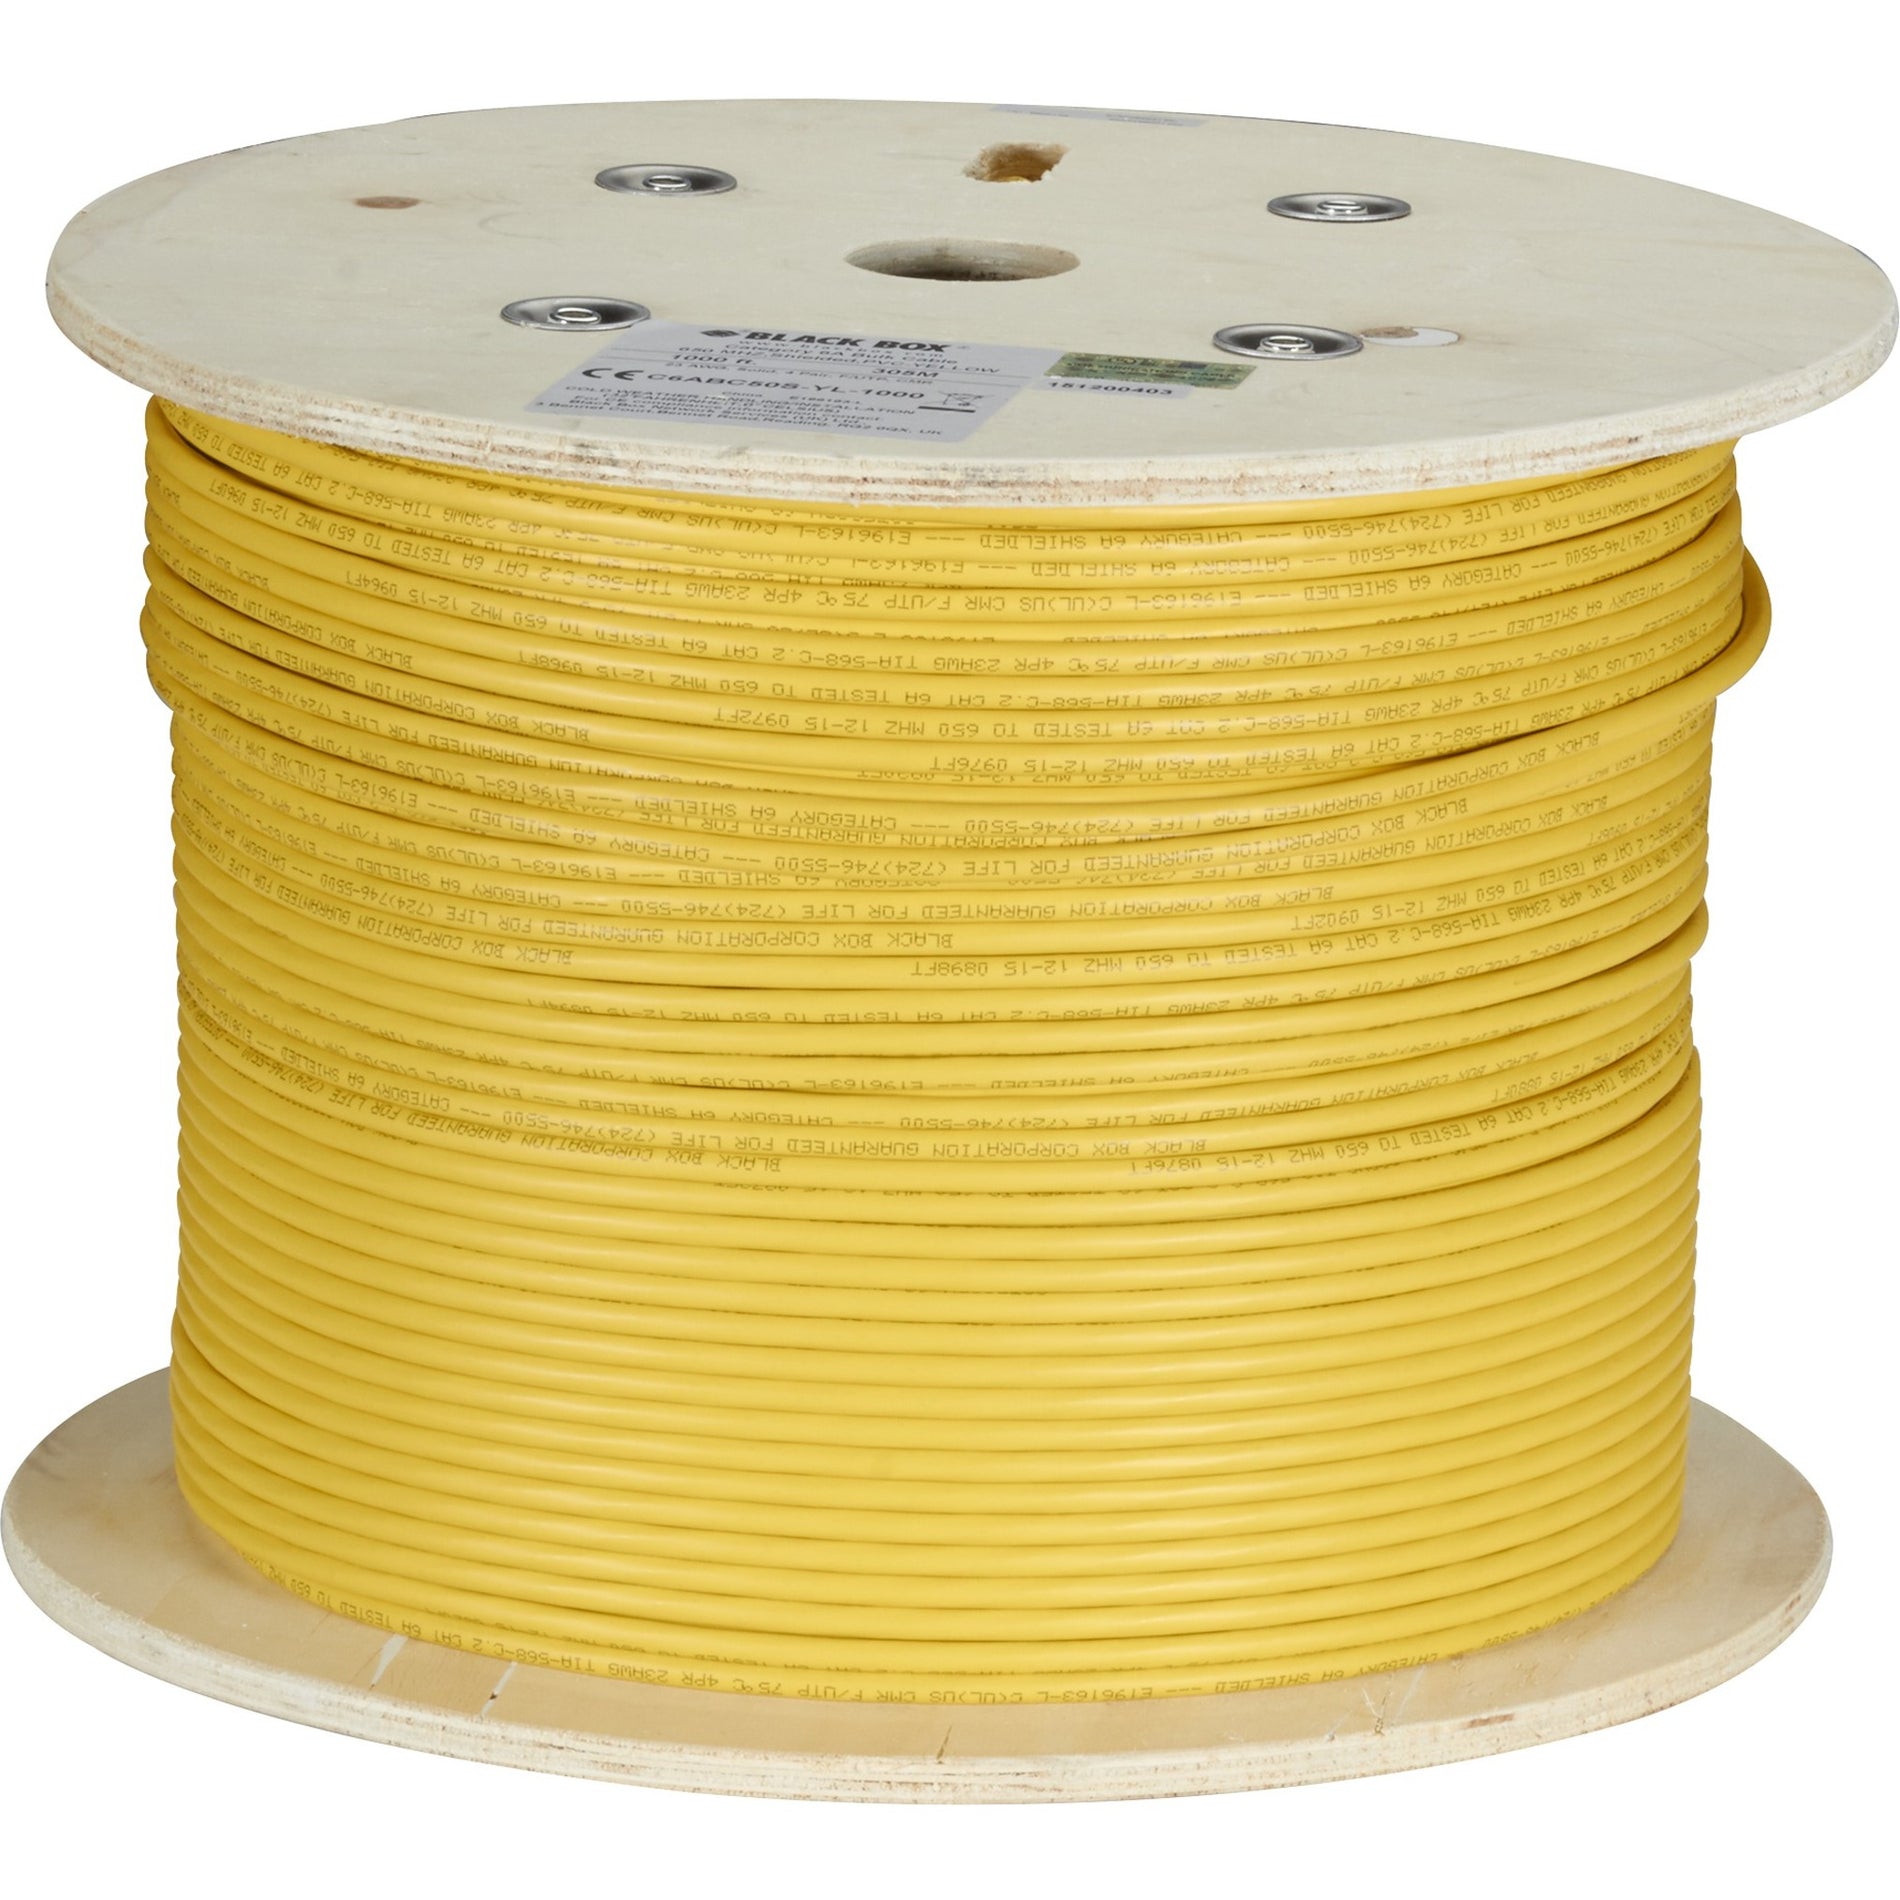 Black Box C6ABC50S-STR-YL-1000 GigaTrue Cat.6a S/FTP Network Cable, 10 Gbit/s Data Transfer Rate, 1000 ft Length, Yellow